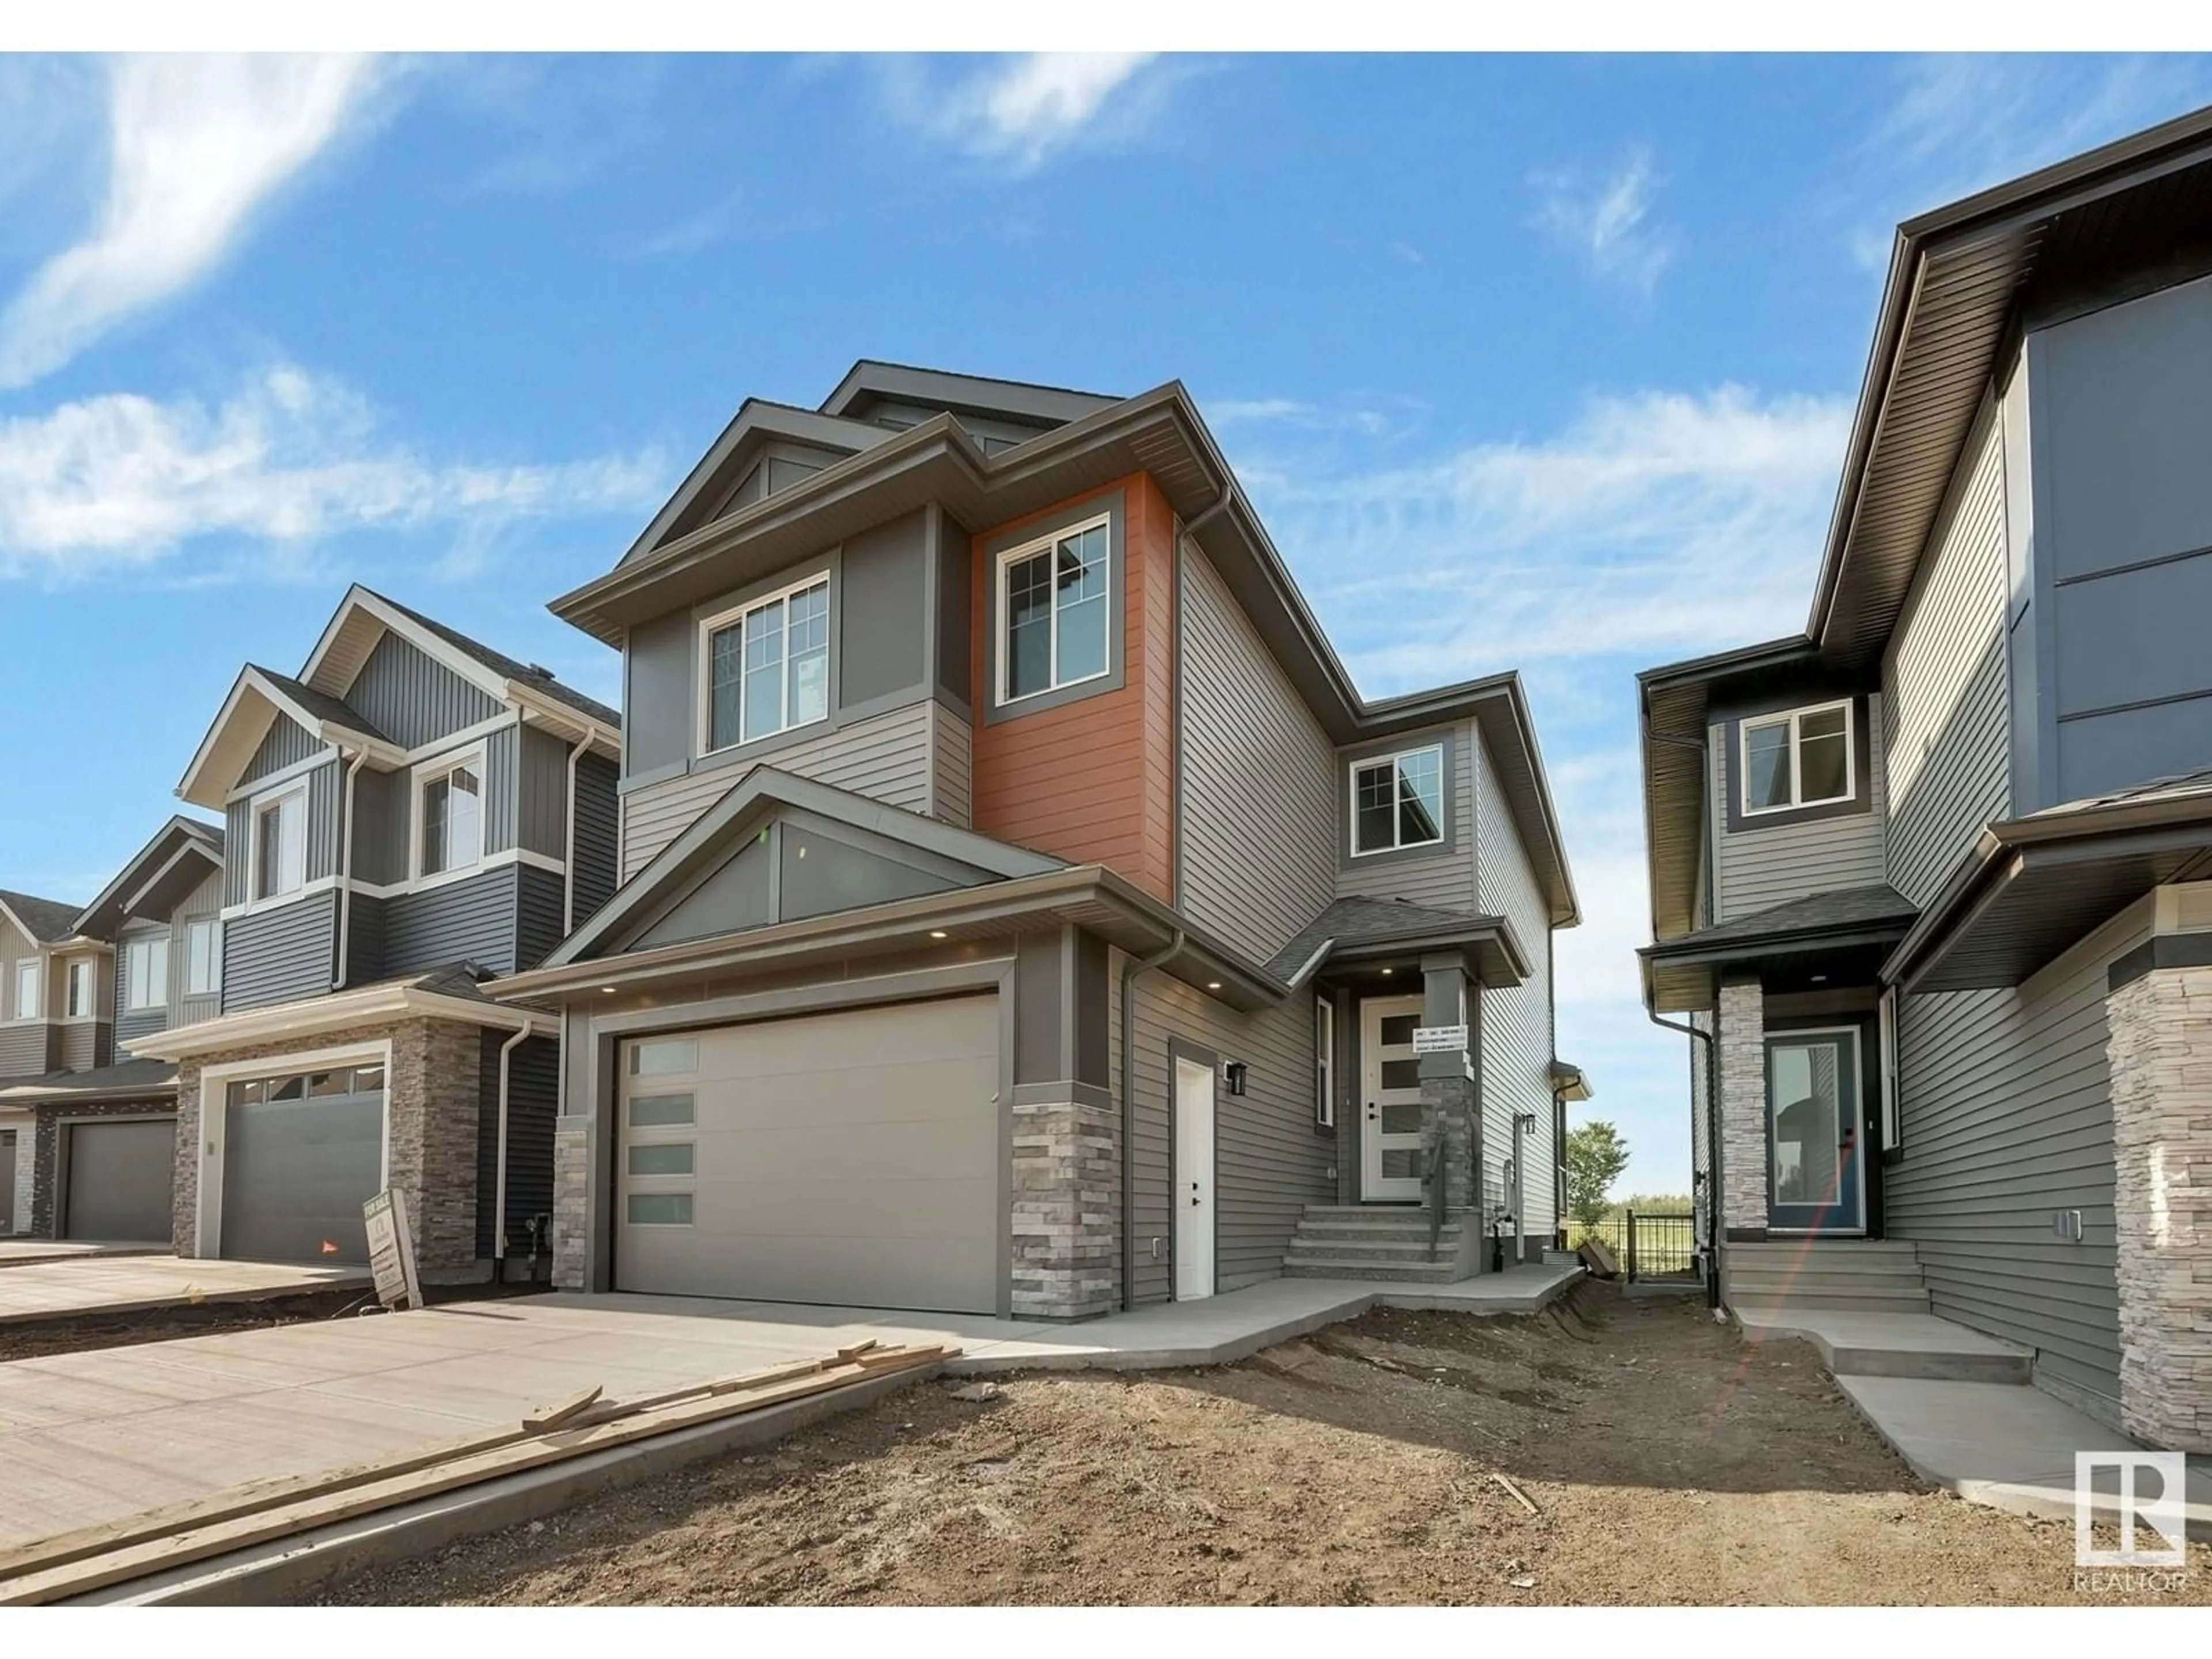 A pic from exterior of the house or condo for 22216 82 AV NW, Edmonton Alberta T5T7L2